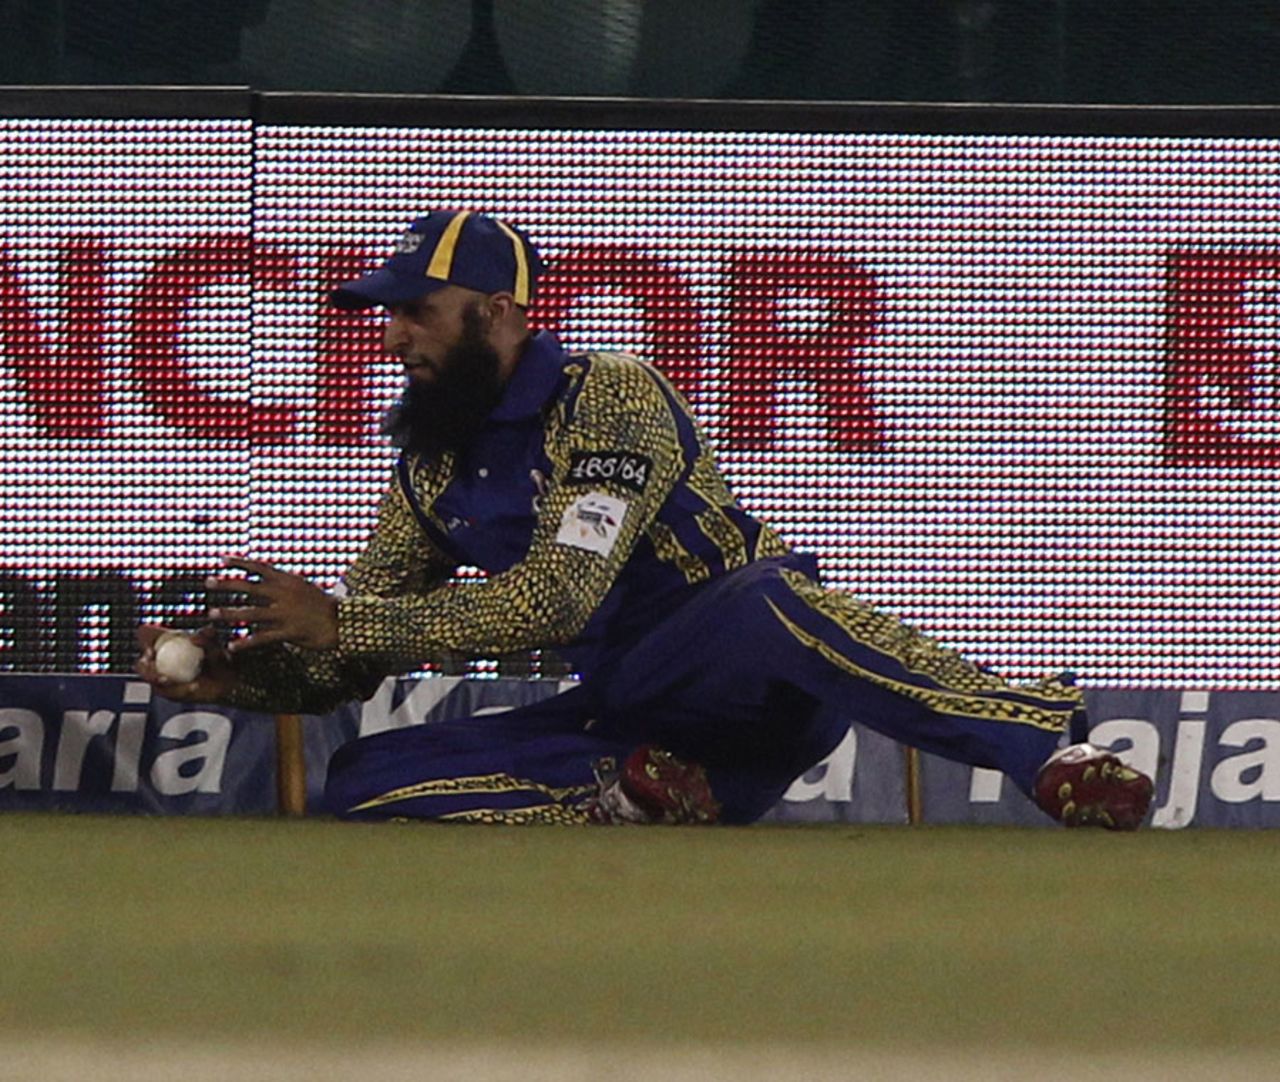 Hashim Amla took a diving catch but couldn't prevent himself from sliding into the boundary, Cape Cobras v Northern Knights, Champions League T20, Raipur, September 19, 2014